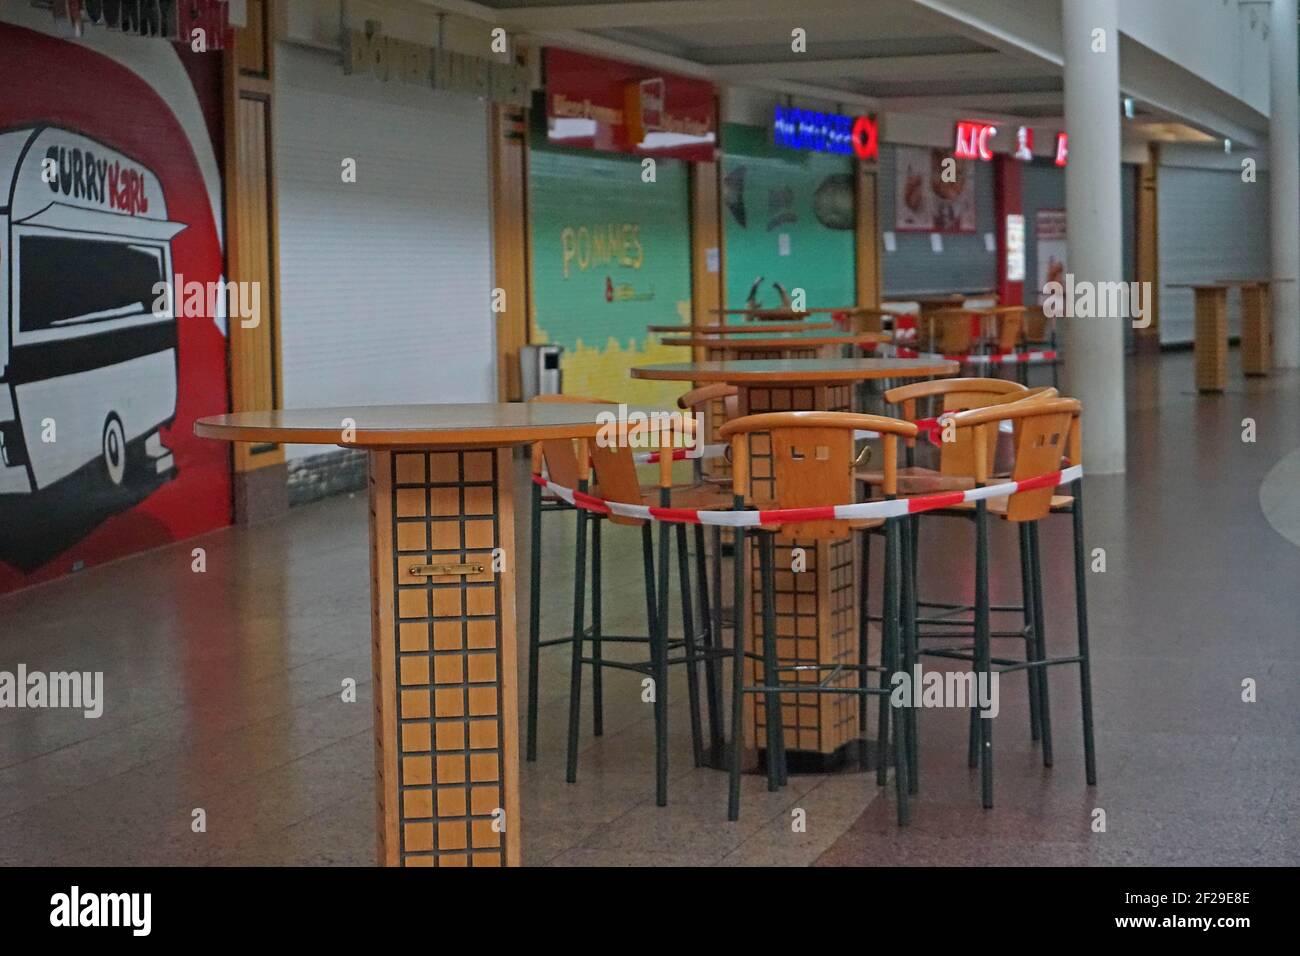 Family friendly Food Lounge in the Shopping Mall 'Rhein-Ruhr-Zentrum' Humboldtstr closed and empty on Saturday afternoon, April 18th, 2020 Stock Photo